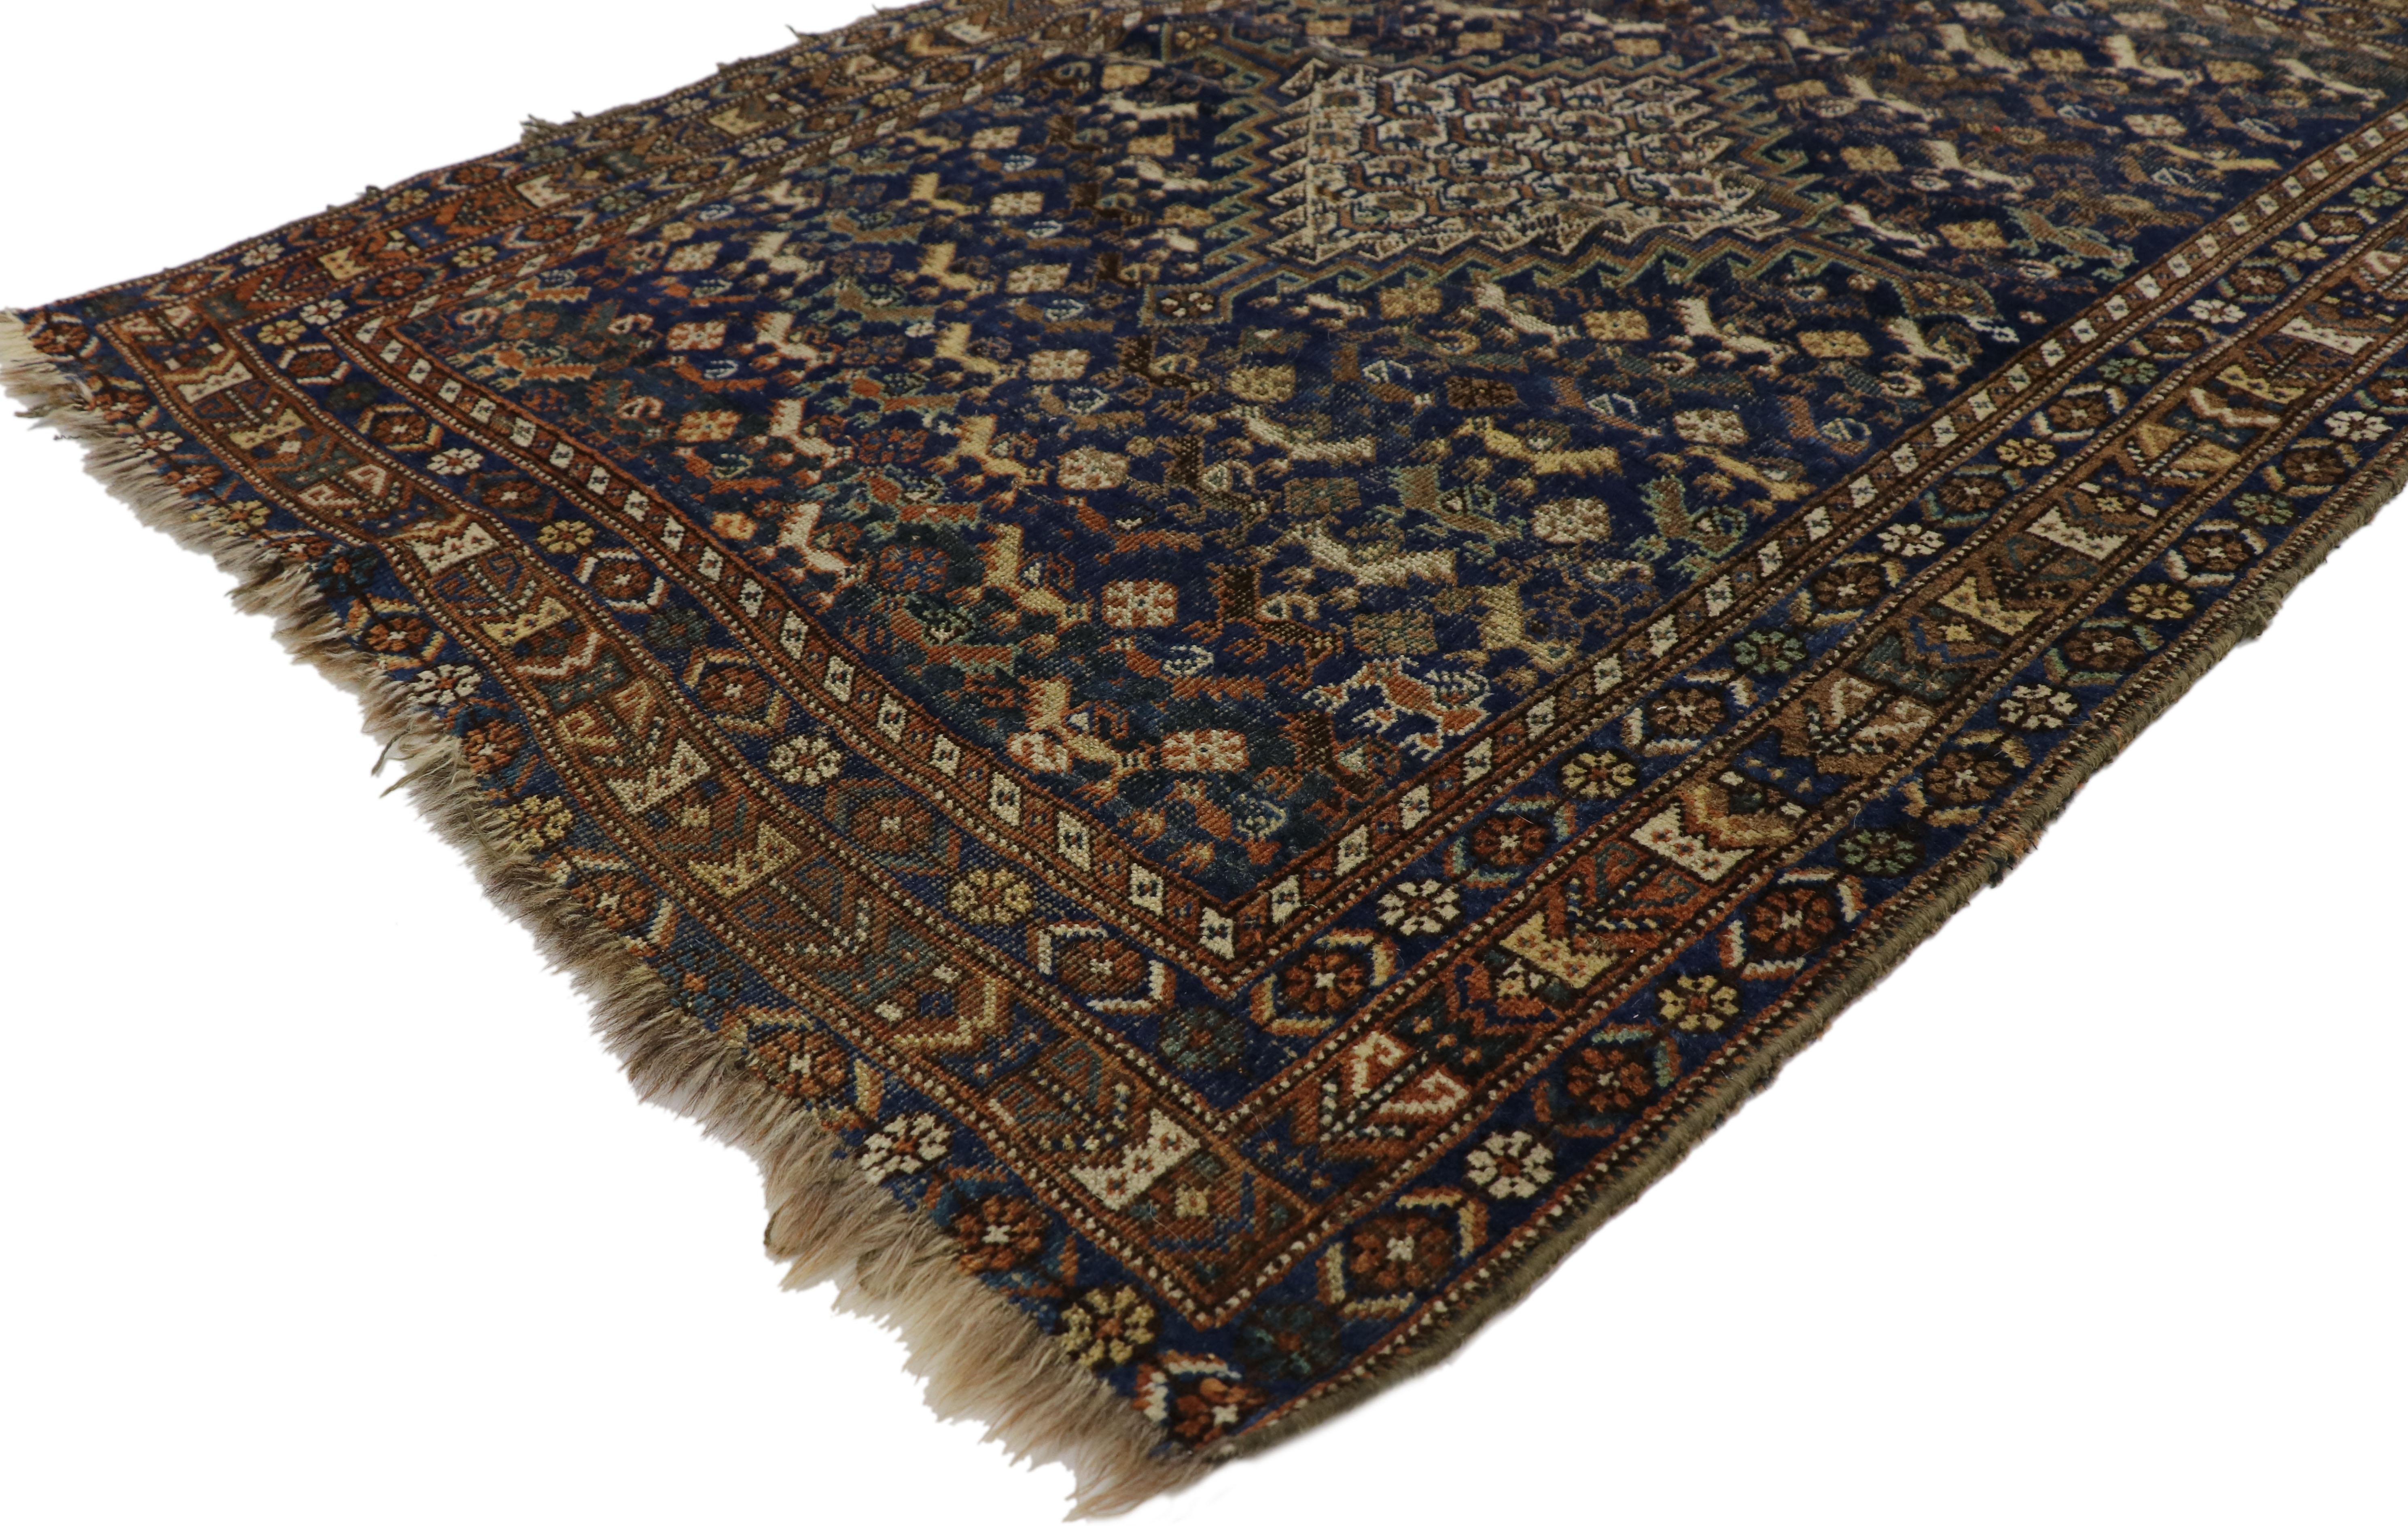 77331, worn-in distressed antique Persian Shiraz accent rug with rustic Adirondack Lodge style. This hand knotted wool distressed antique Persian Shiraz rug with rustic Adirondack style features a latch-hook diamond lozenge amulet surround by an